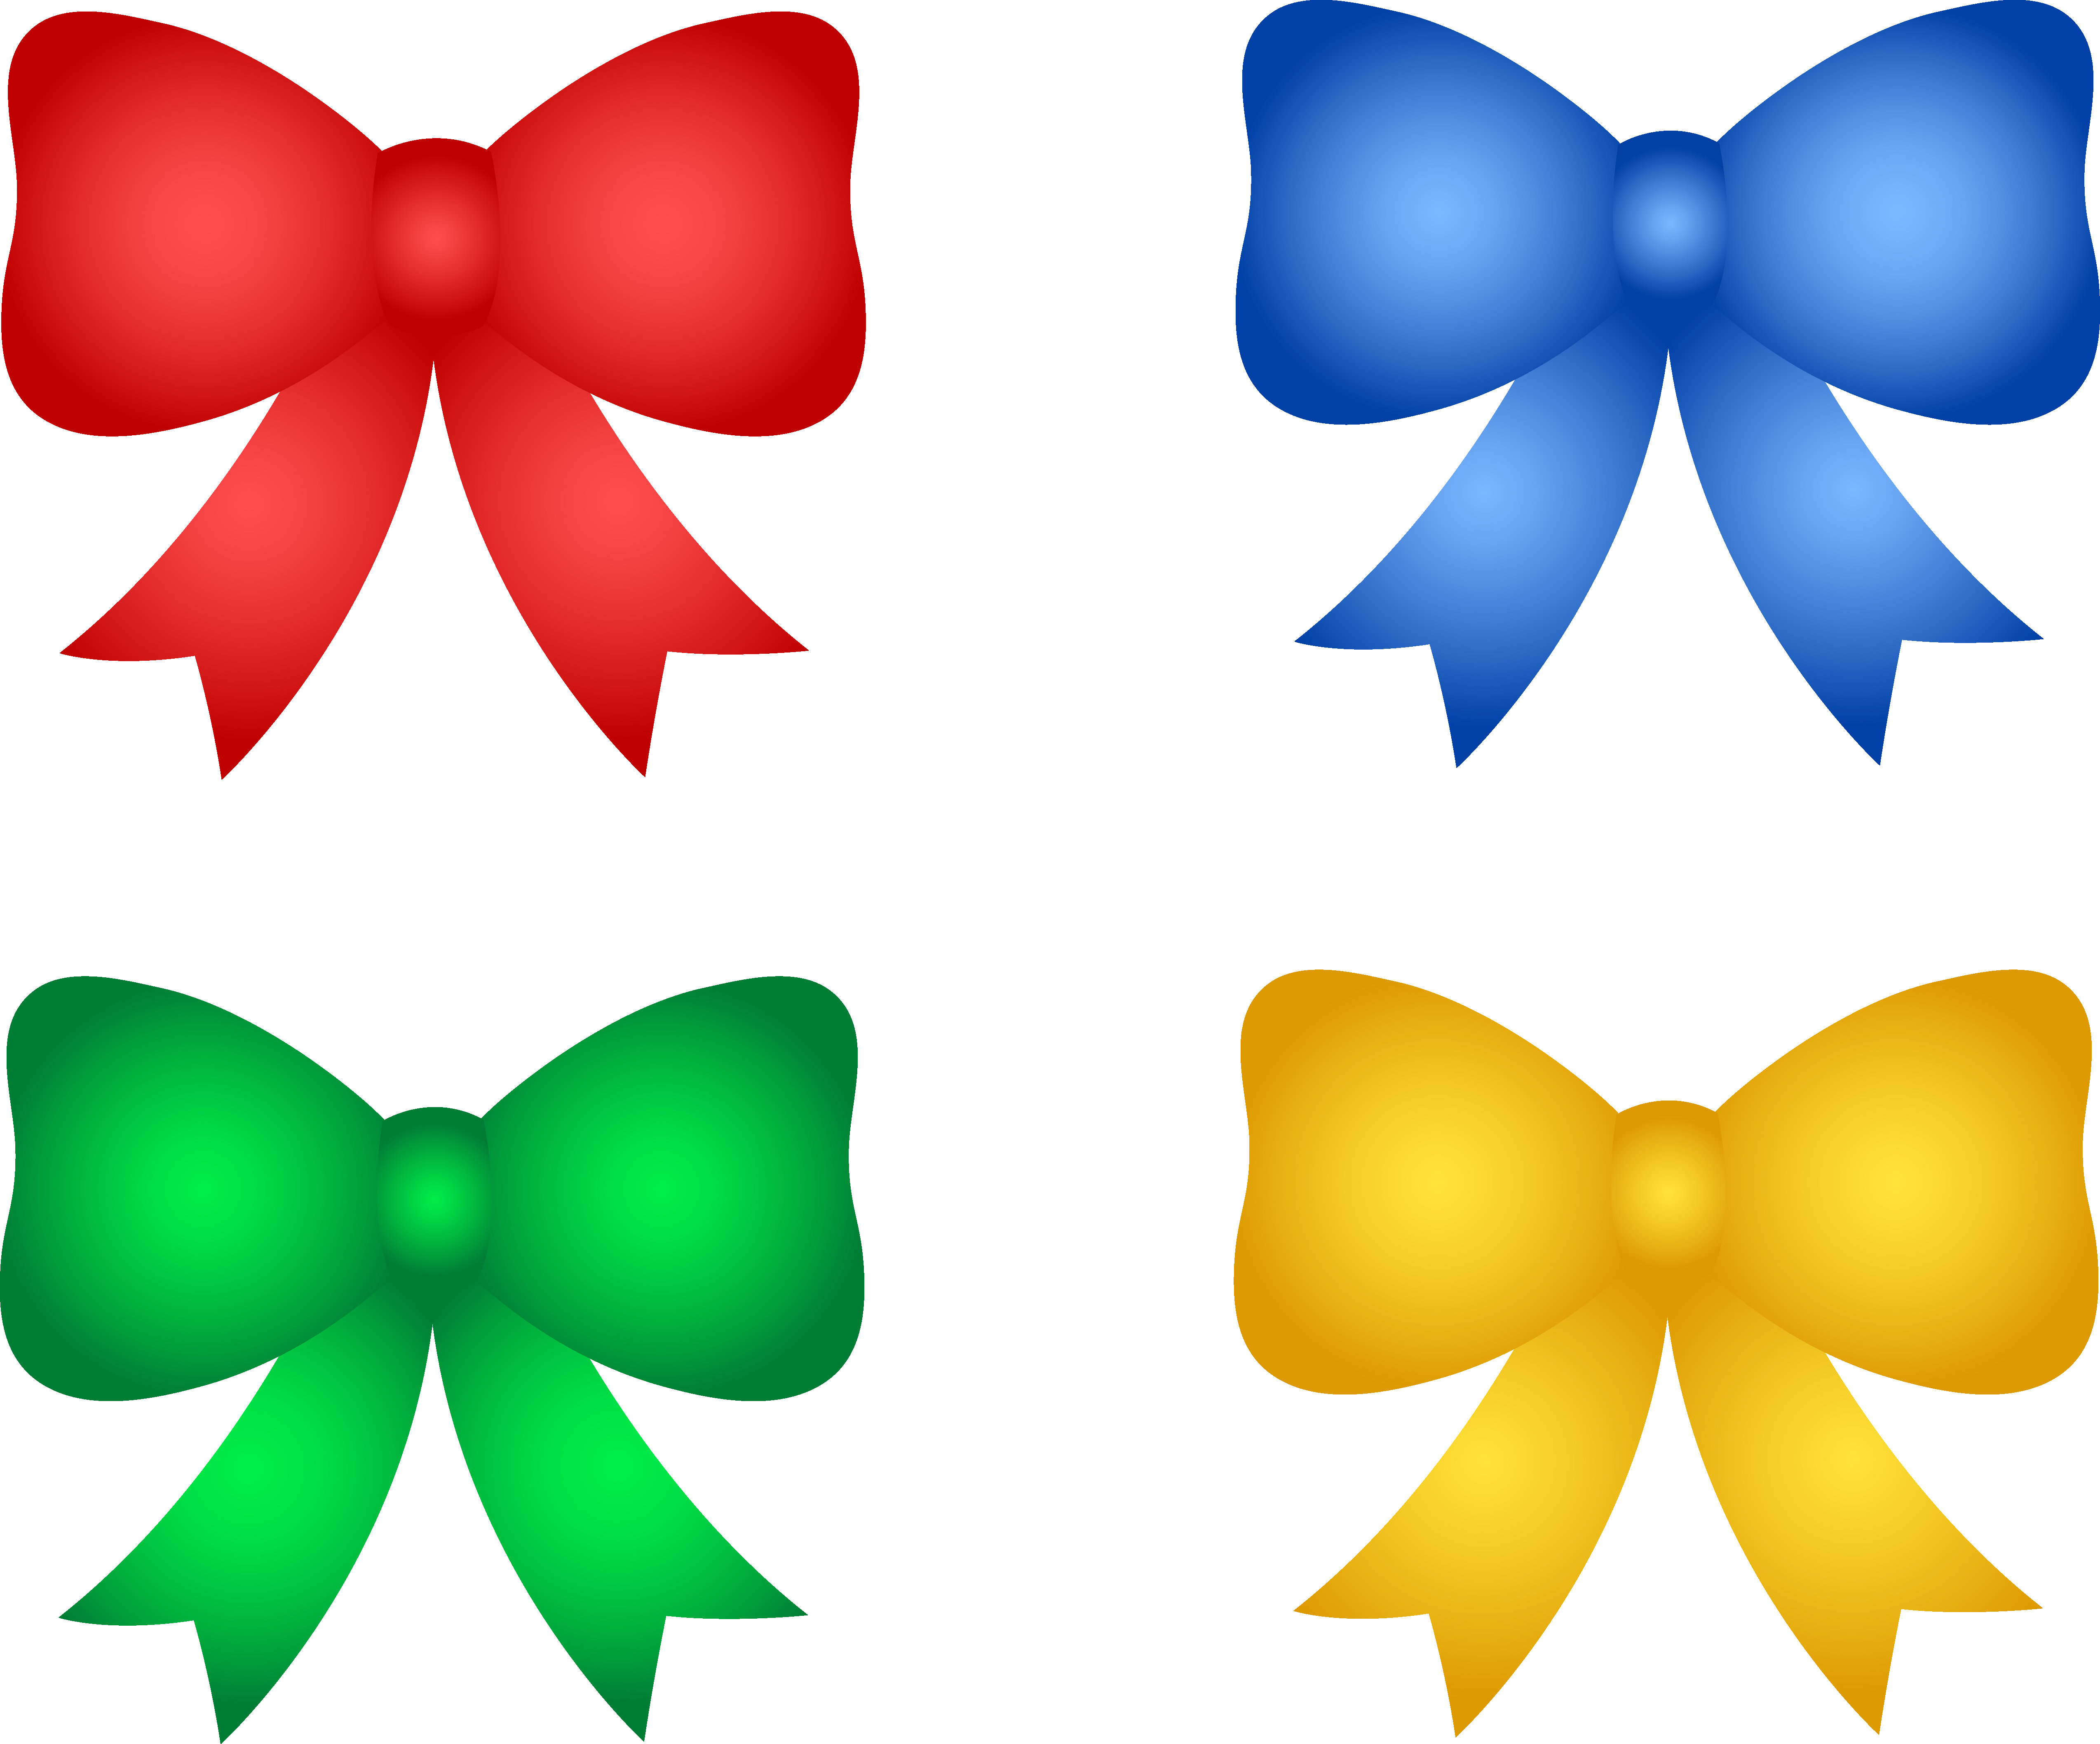 Download This Image Gold Christmas Bow Clipart. Snowjet.co